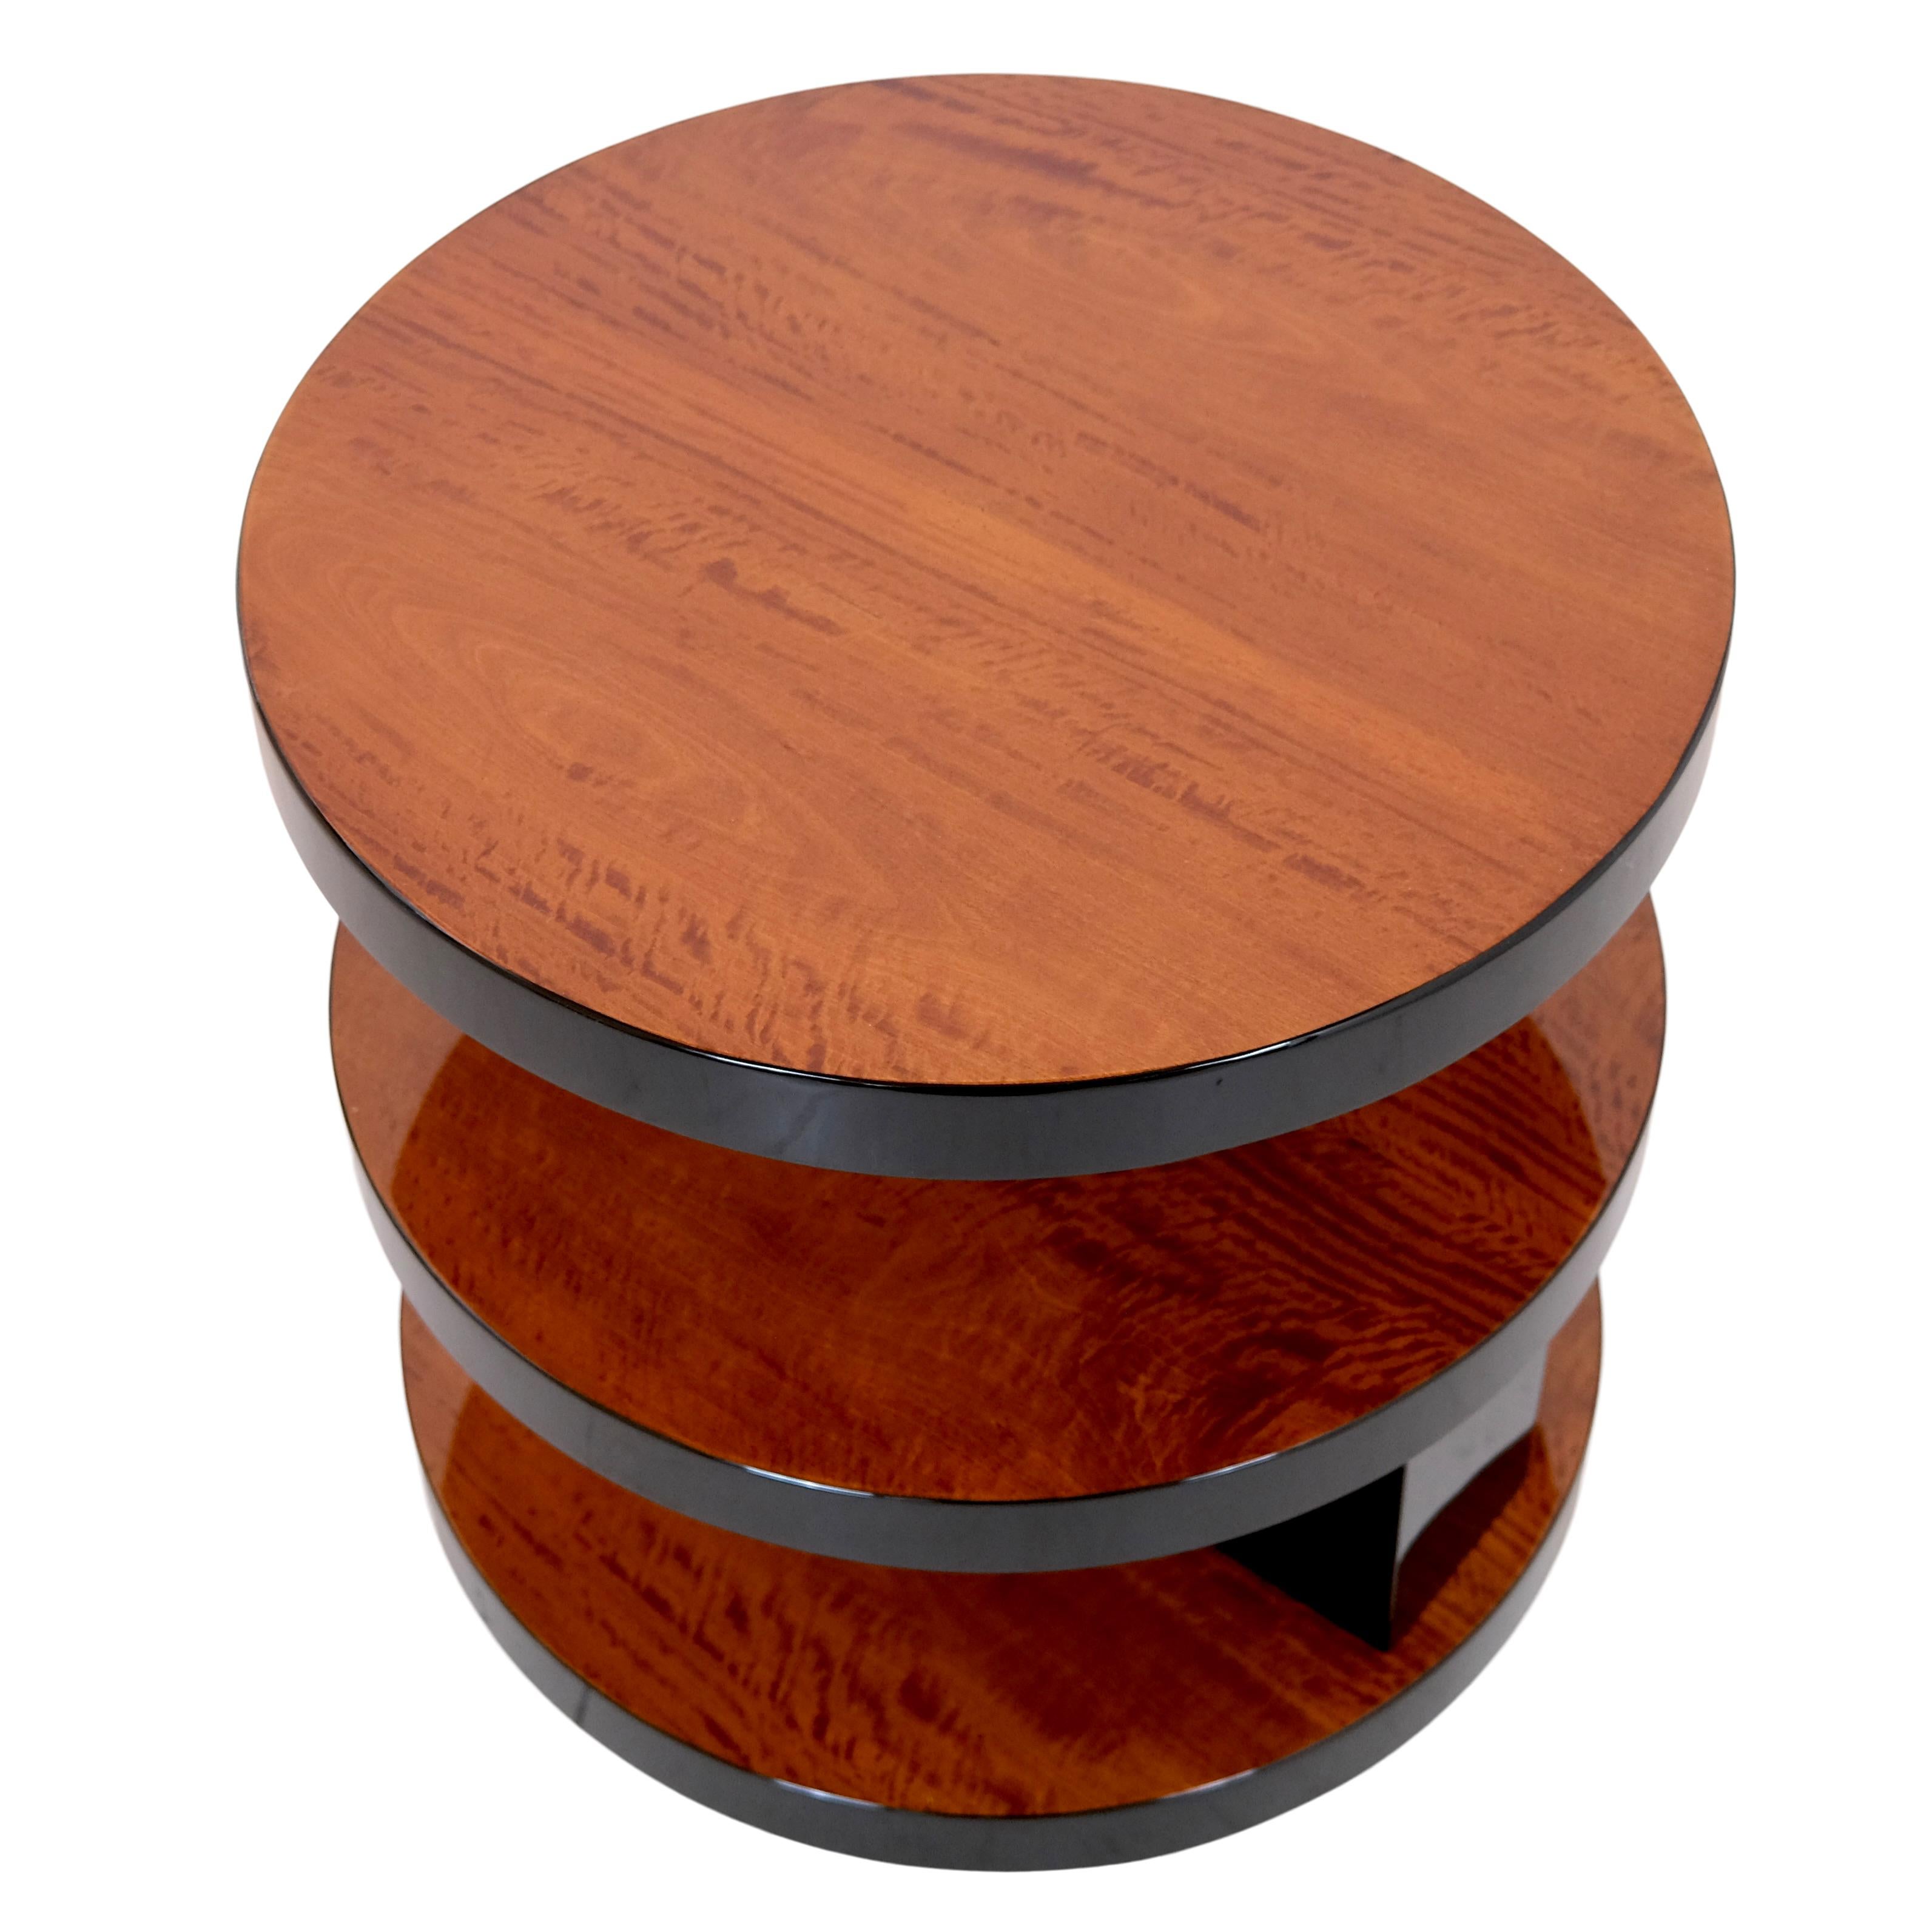 Blackened Round French Art Deco Mahogany Side Table with Black Lacquer with Three Levels